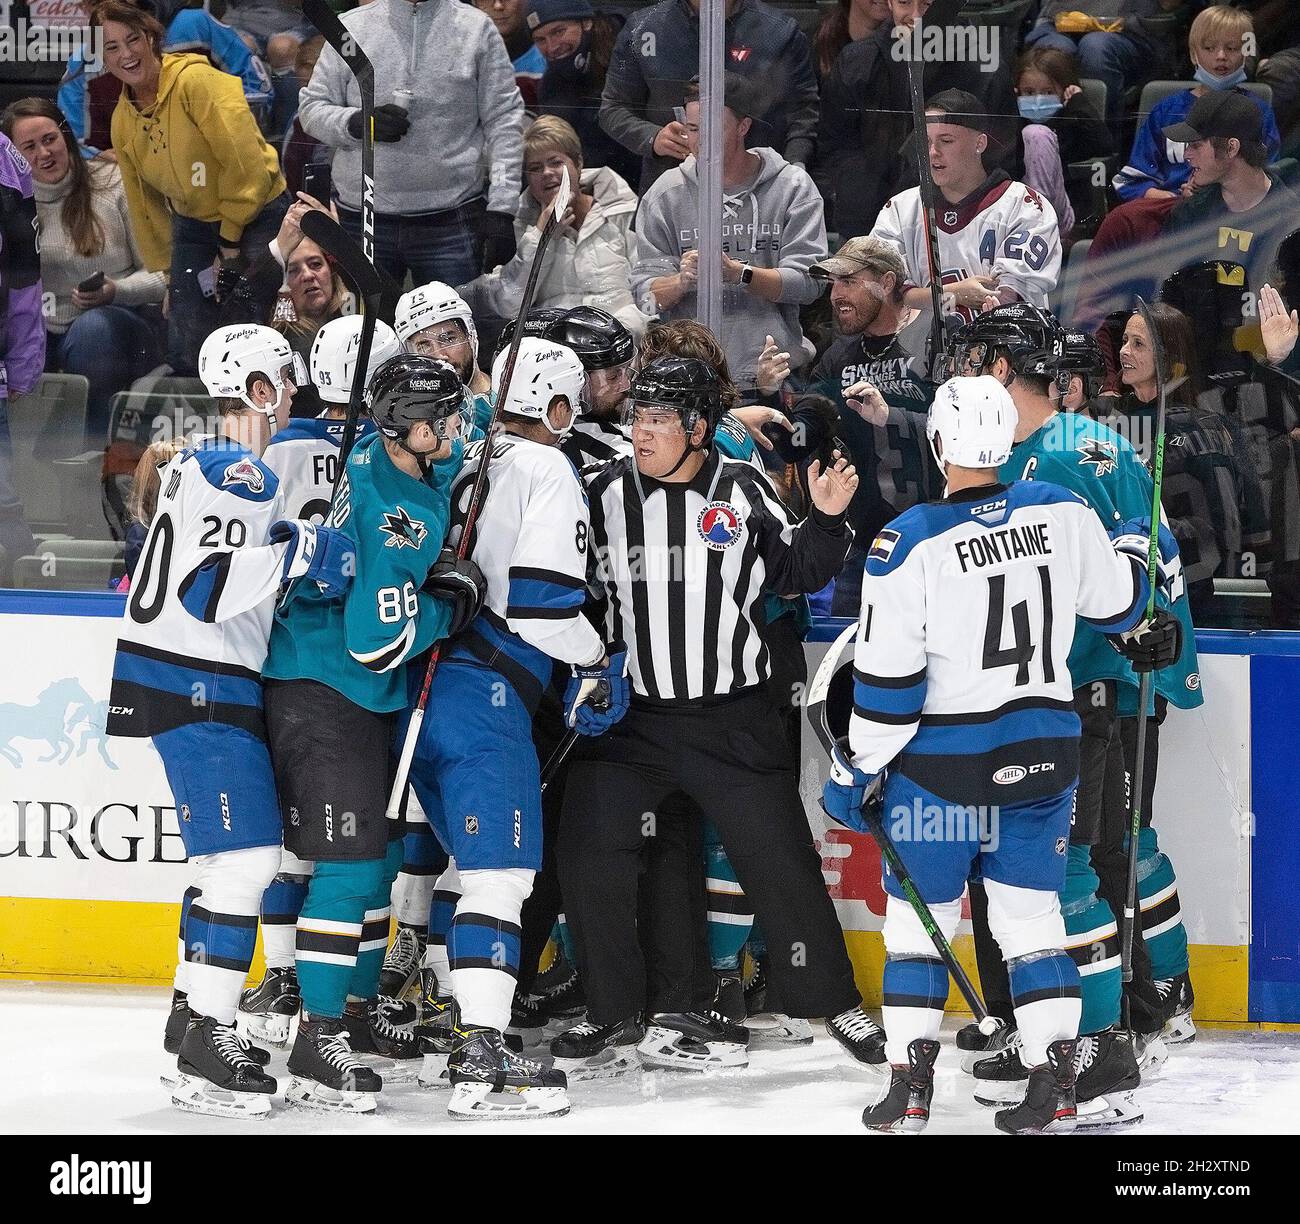 Loveland, Colorado, USA. 23rd Oct, 2021. An AHL Referee tries to stop a big tussle between players during the 1st. Period Sat. night at the Budweiser Events Center. The Eagles lose to the Barracudas 3-2. (Credit Image: © Hector Acevedo/ZUMA Press Wire) Stock Photo